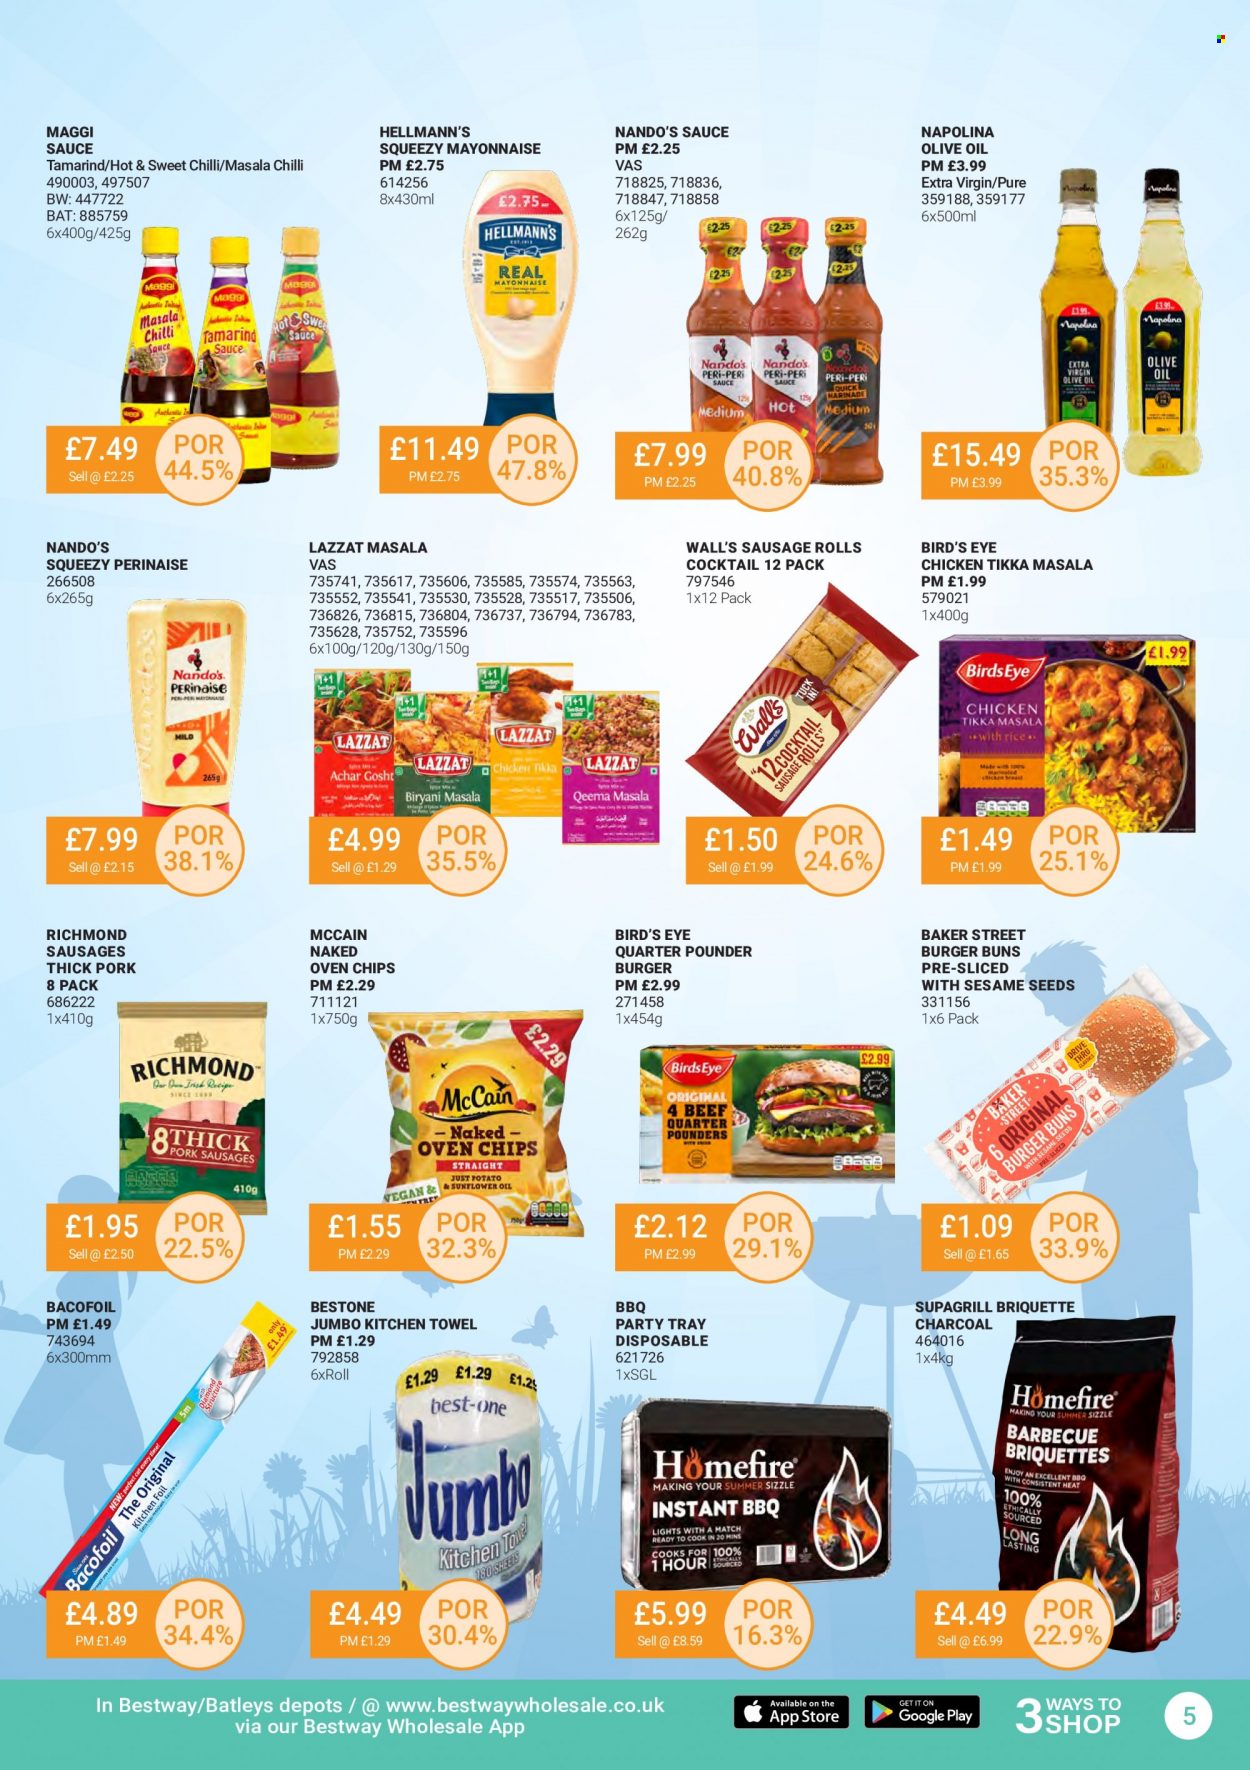 thumbnail - Bestway offer  - 24/06/2022 - 21/07/2022 - Sales products - sausage rolls, buns, burger buns, sauce, Bird's Eye, Tikka Masala, sausage, Hellmann’s, McCain, frozen chips, Maggi, tamarind, extra virgin olive oil, olive oil, oil, kitchen towels, charcoal. Page 5.